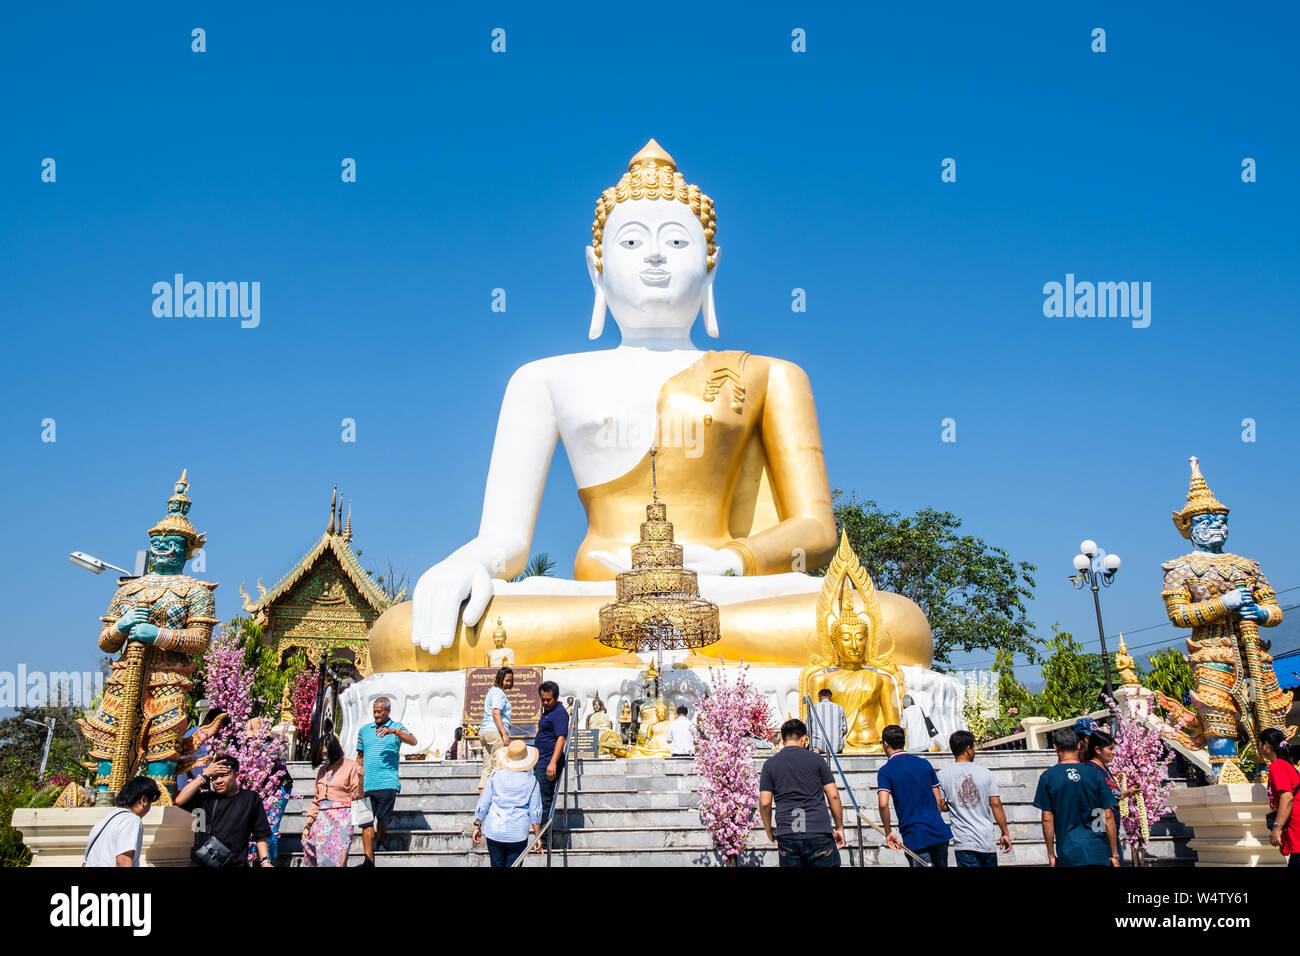 Chiangmai, Thailand - February 24, 2019: View of Thai pilgrimage traveler with 17 Meters tall sitting Buddha at Wat Phra That Doi Kham temple in Chian Stock Photo